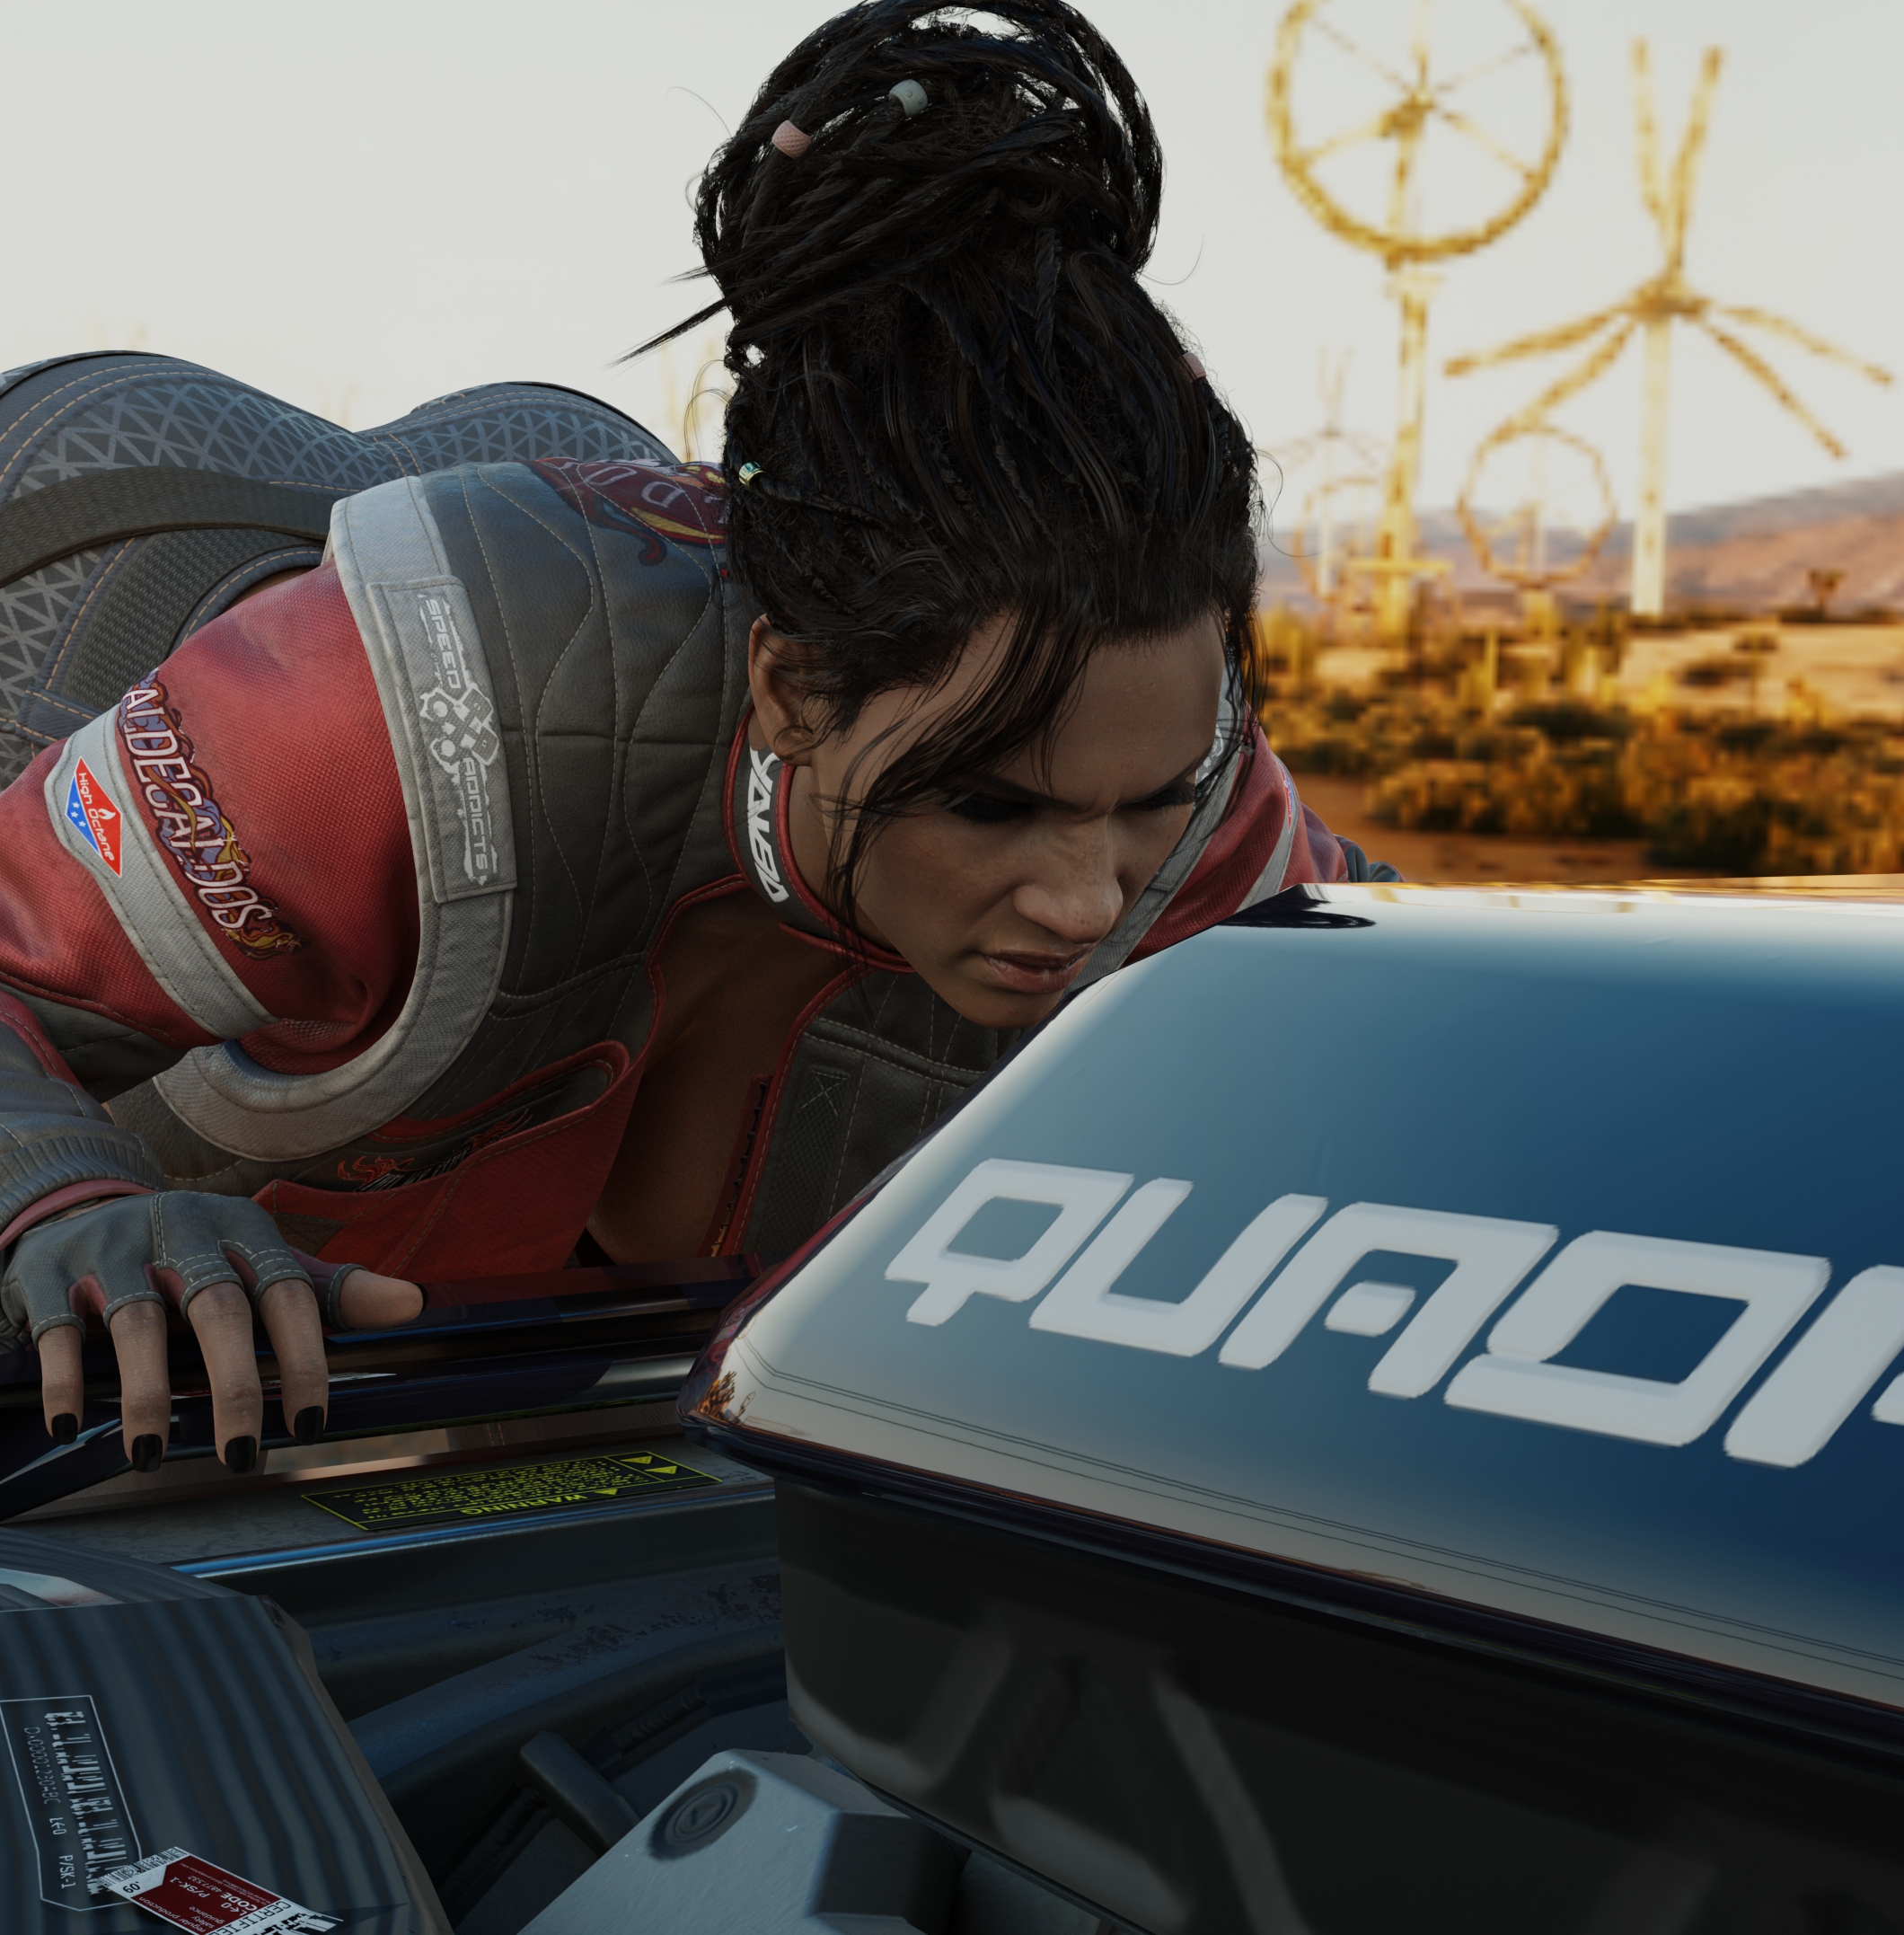 Panam s Car trouble Panam Palmer Cyberpunk2077 Cyberpunk 2077 Cyberpunk Boobs Big Ass Big Butt Ass Huge Ass Black Hair Car Mechanic 3d Girl Angry Back View Bent Over 5